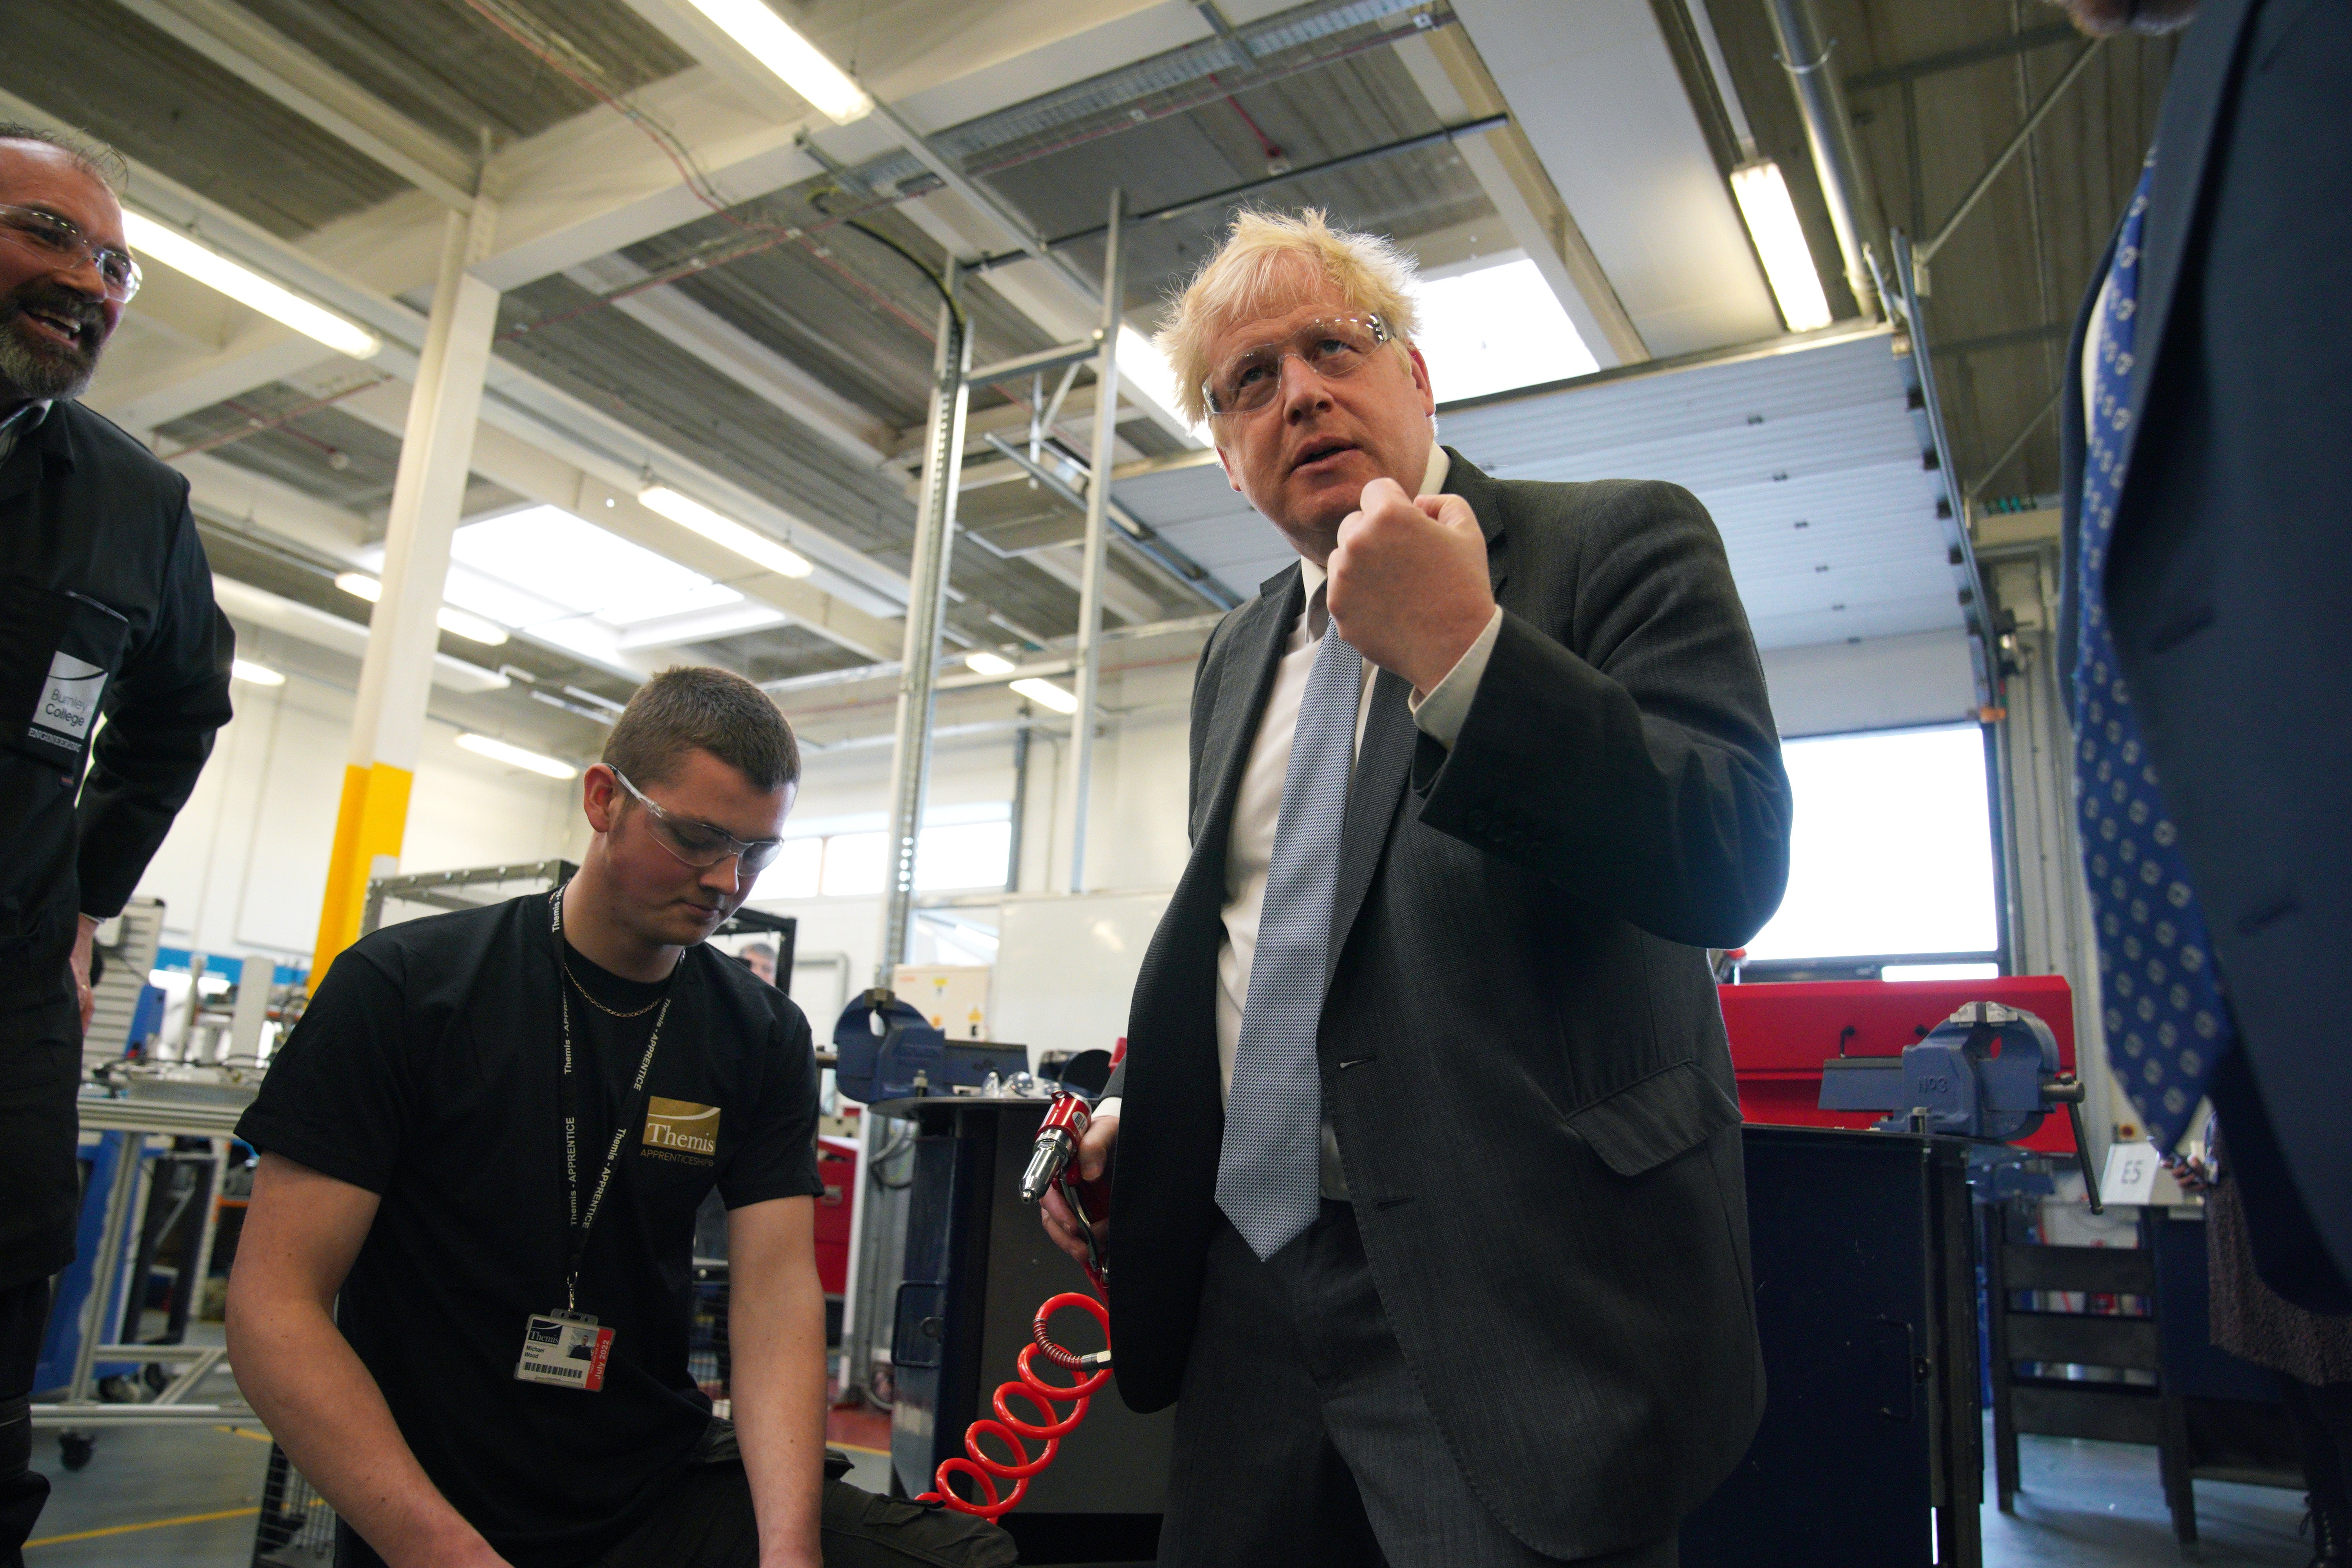 Prime Minister Boris Johnson holds a rivet gun during a campaign visit to Burnley College Sixth Form Centre (Peter Byrne/PA)